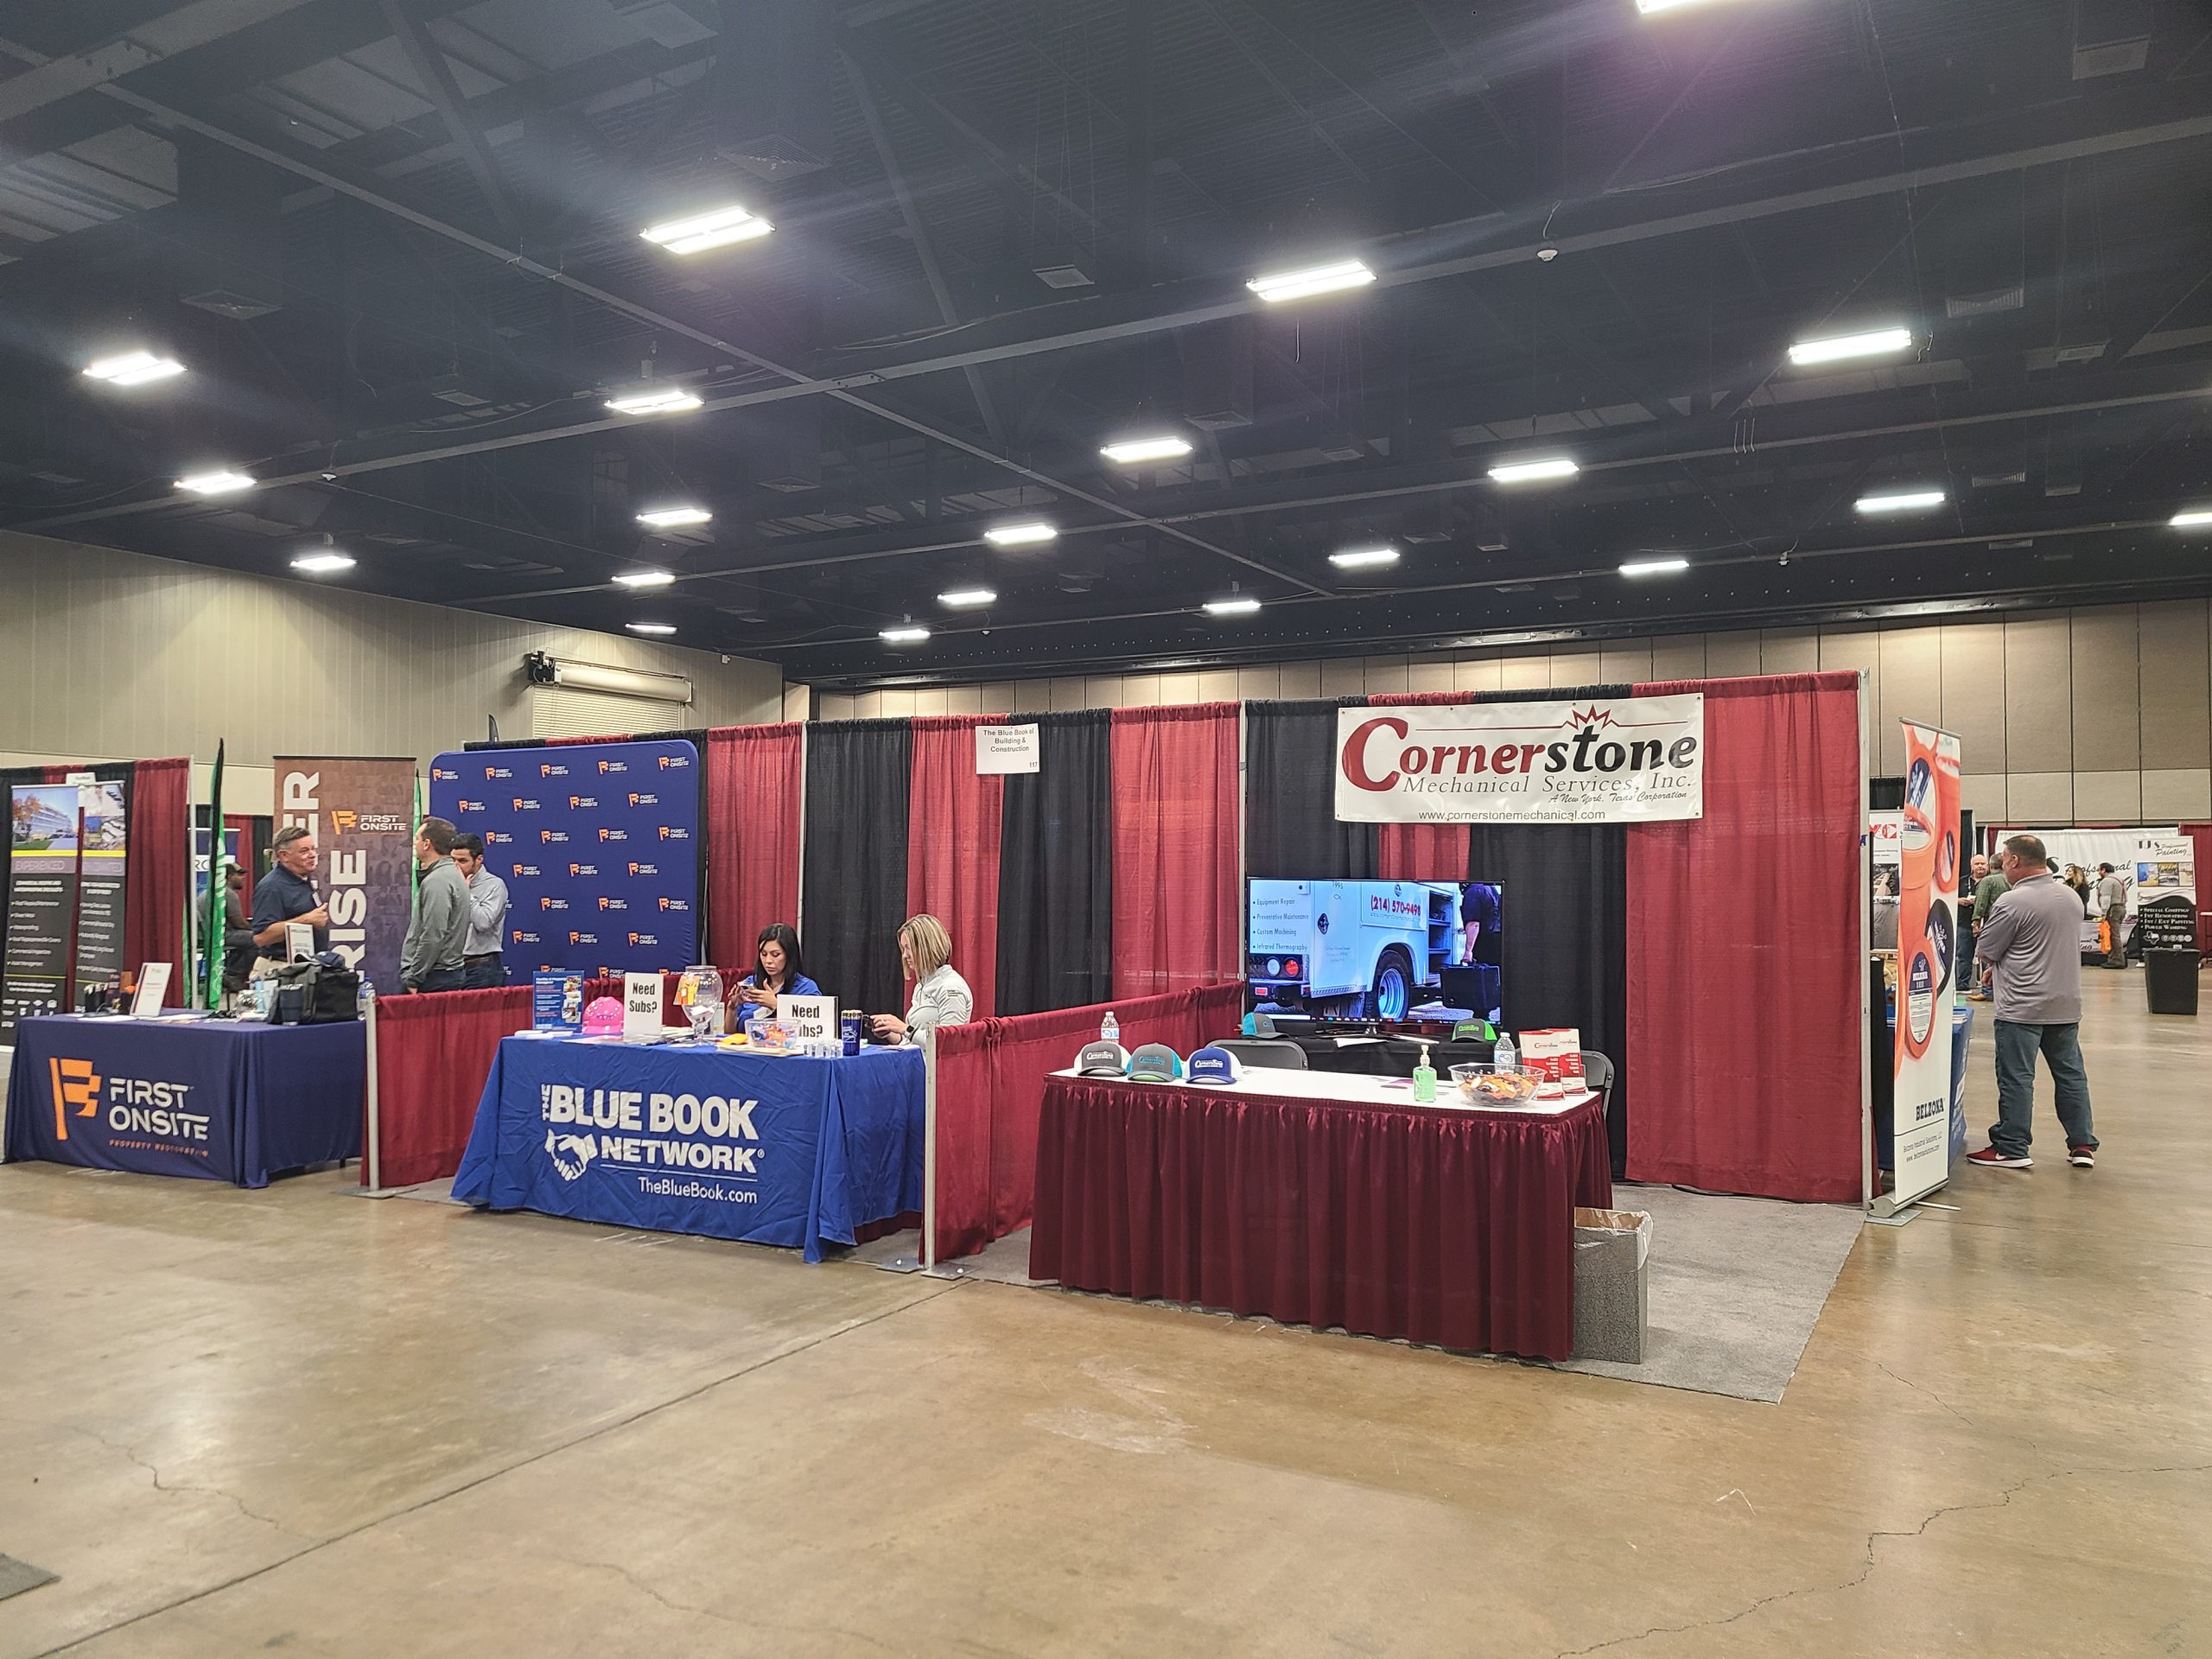 Cornerstone Mechanical Services' booth at an expo